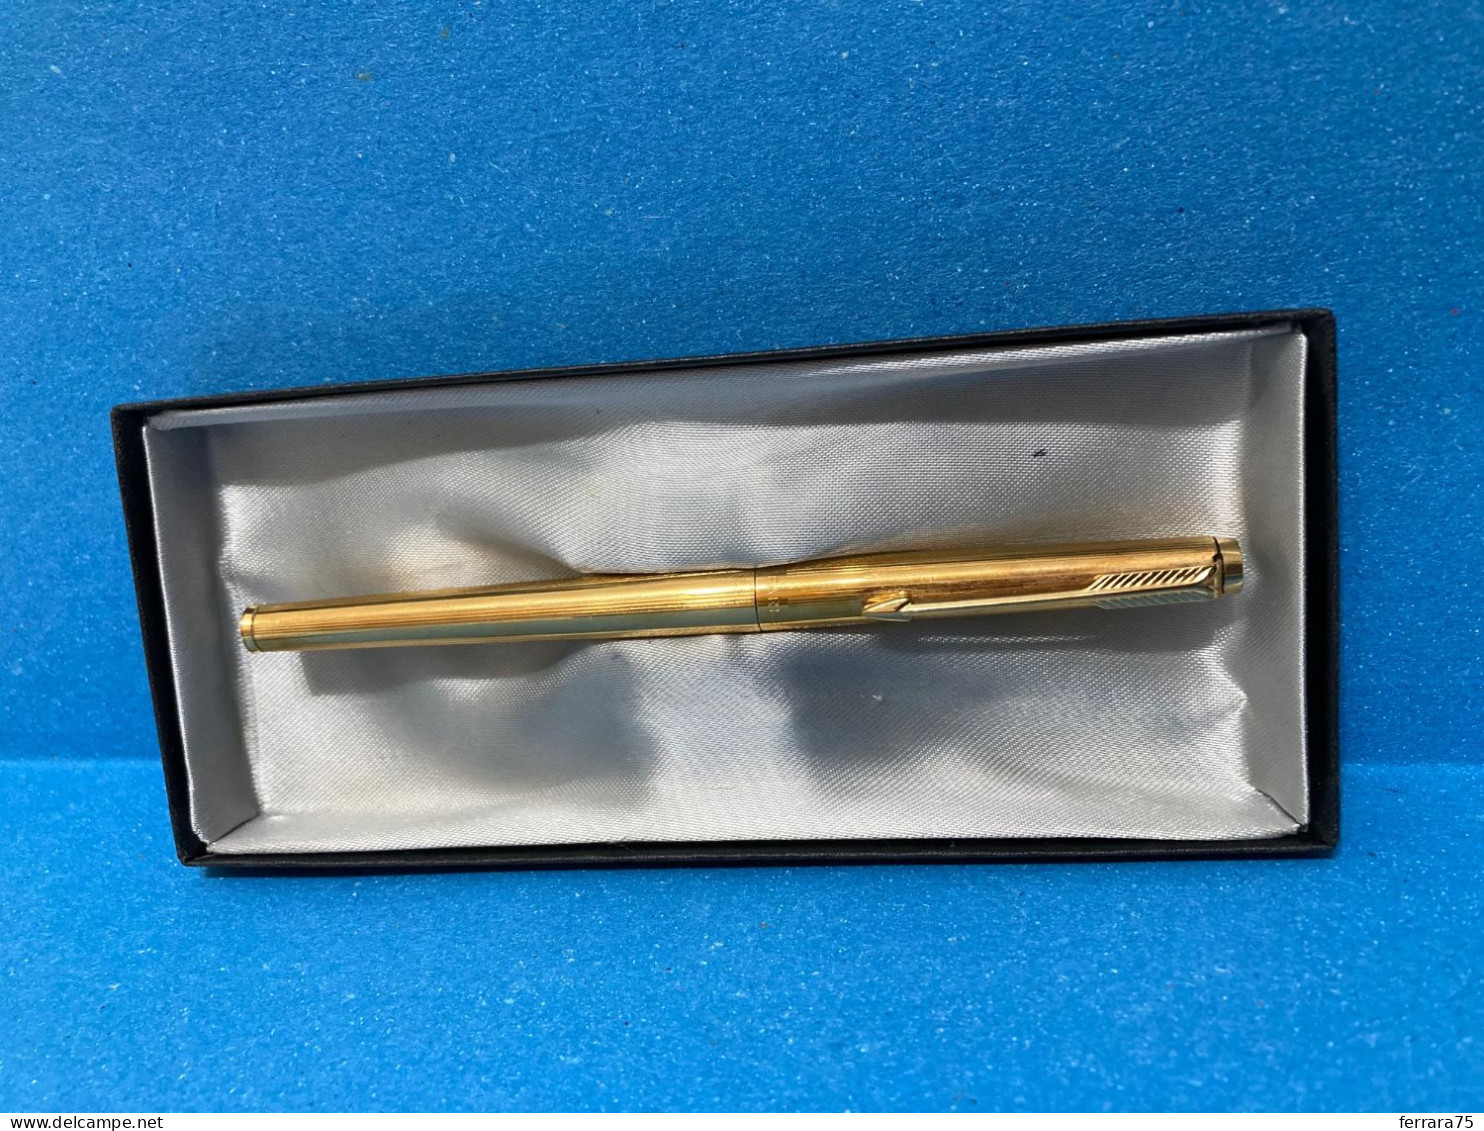 PENNA A SFERA PARKER MADE IN USA VINTAGE GOLD PLATED.? CON SCATOLA. - Pens